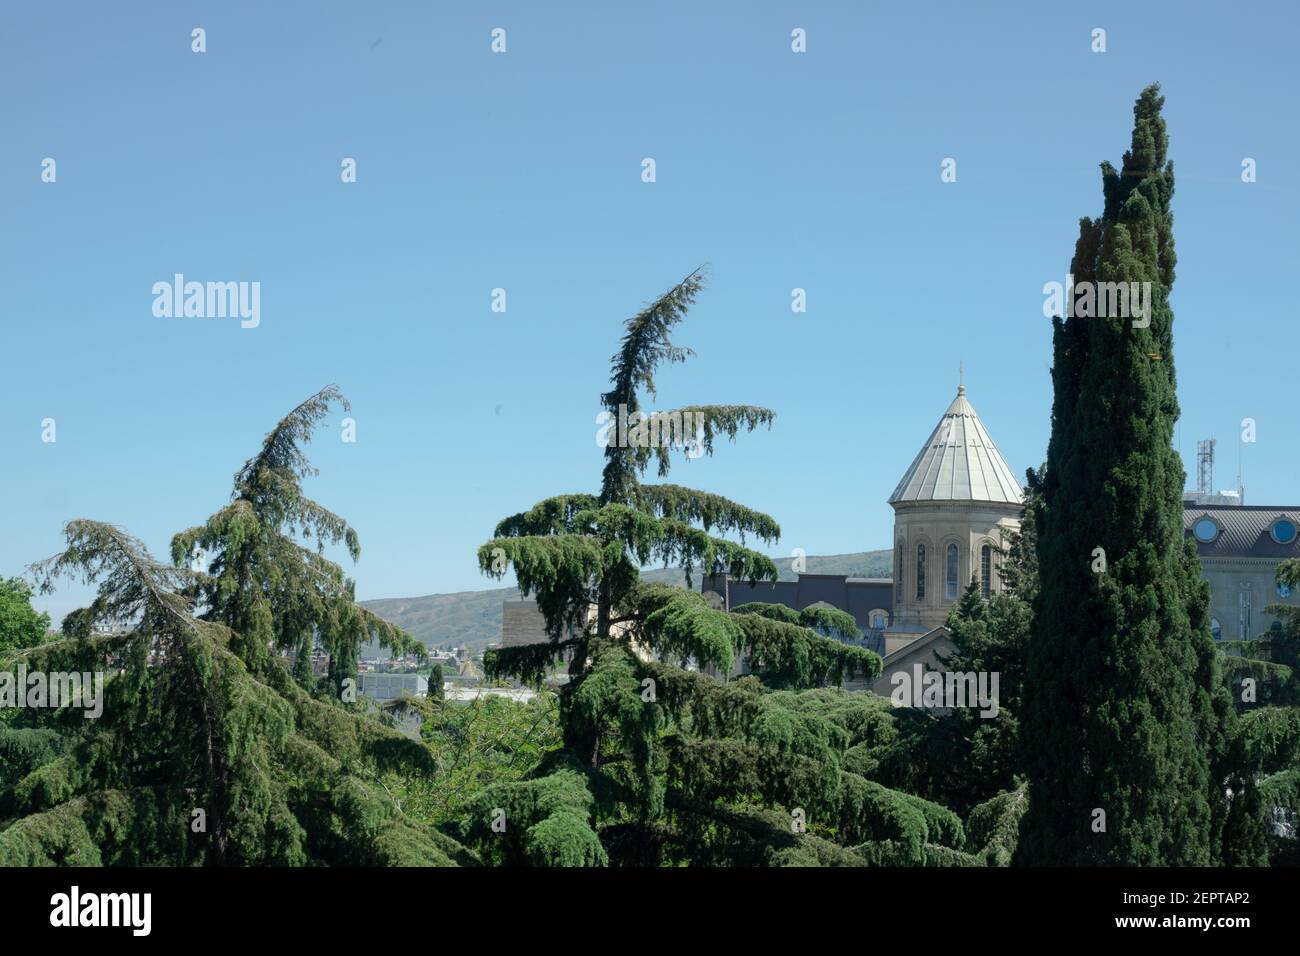 Landscape in Tbilisi, Georgia with coniferous evergreen trees including cypresses, spruces, and the dome of the church om a sunny summer day. Stock Photo